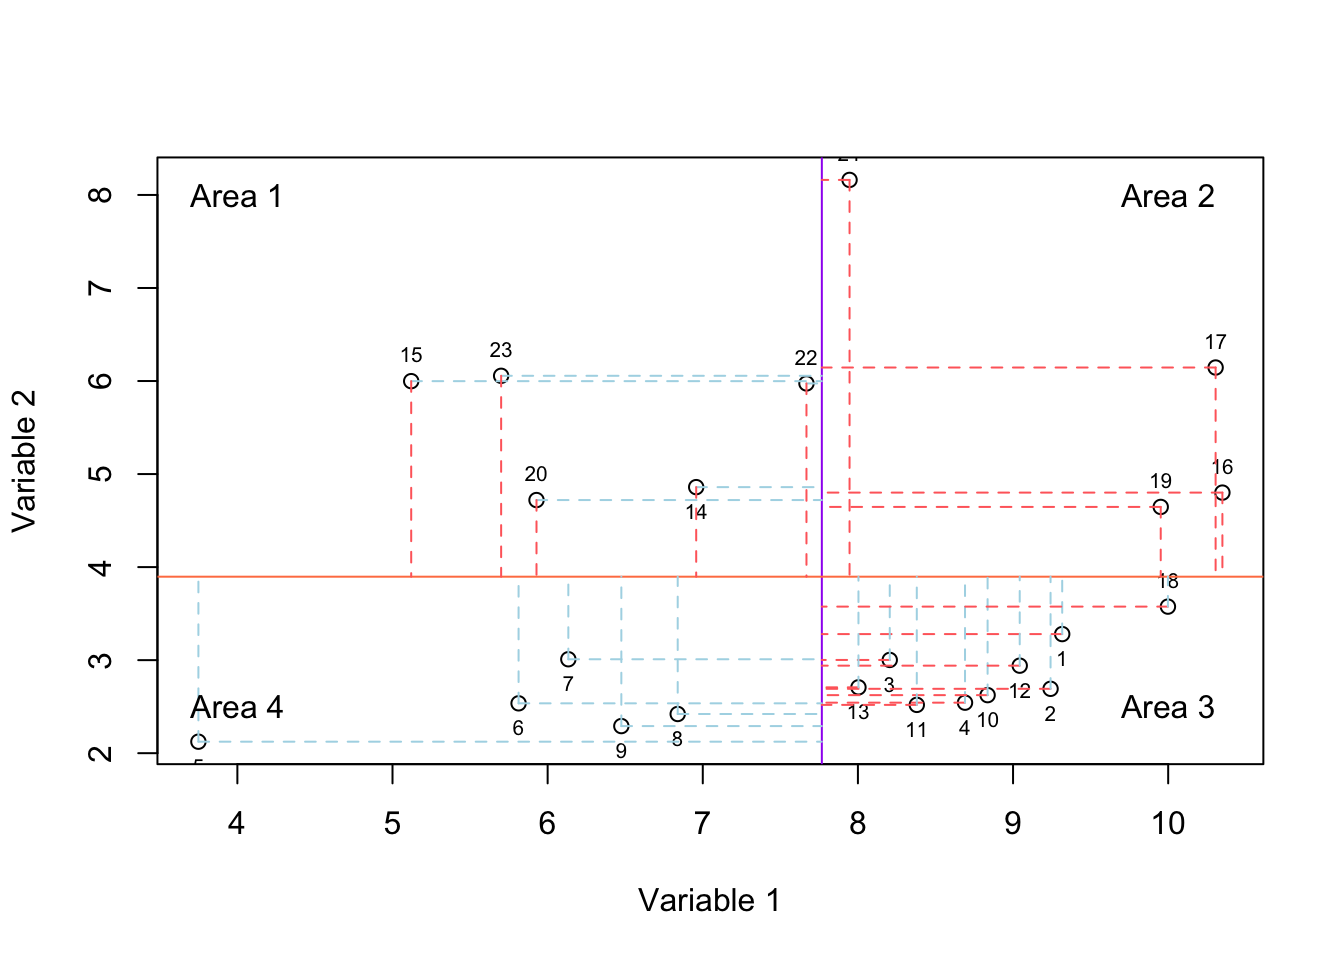 Here, we select two variables and show how the data is spread according to both of the variables. The solid purple and coral lines show mean of variable and variable 2, respectively. For each observation, we have two lines showing whether it has higher or lower value compared to mean of variable one and variable 2.